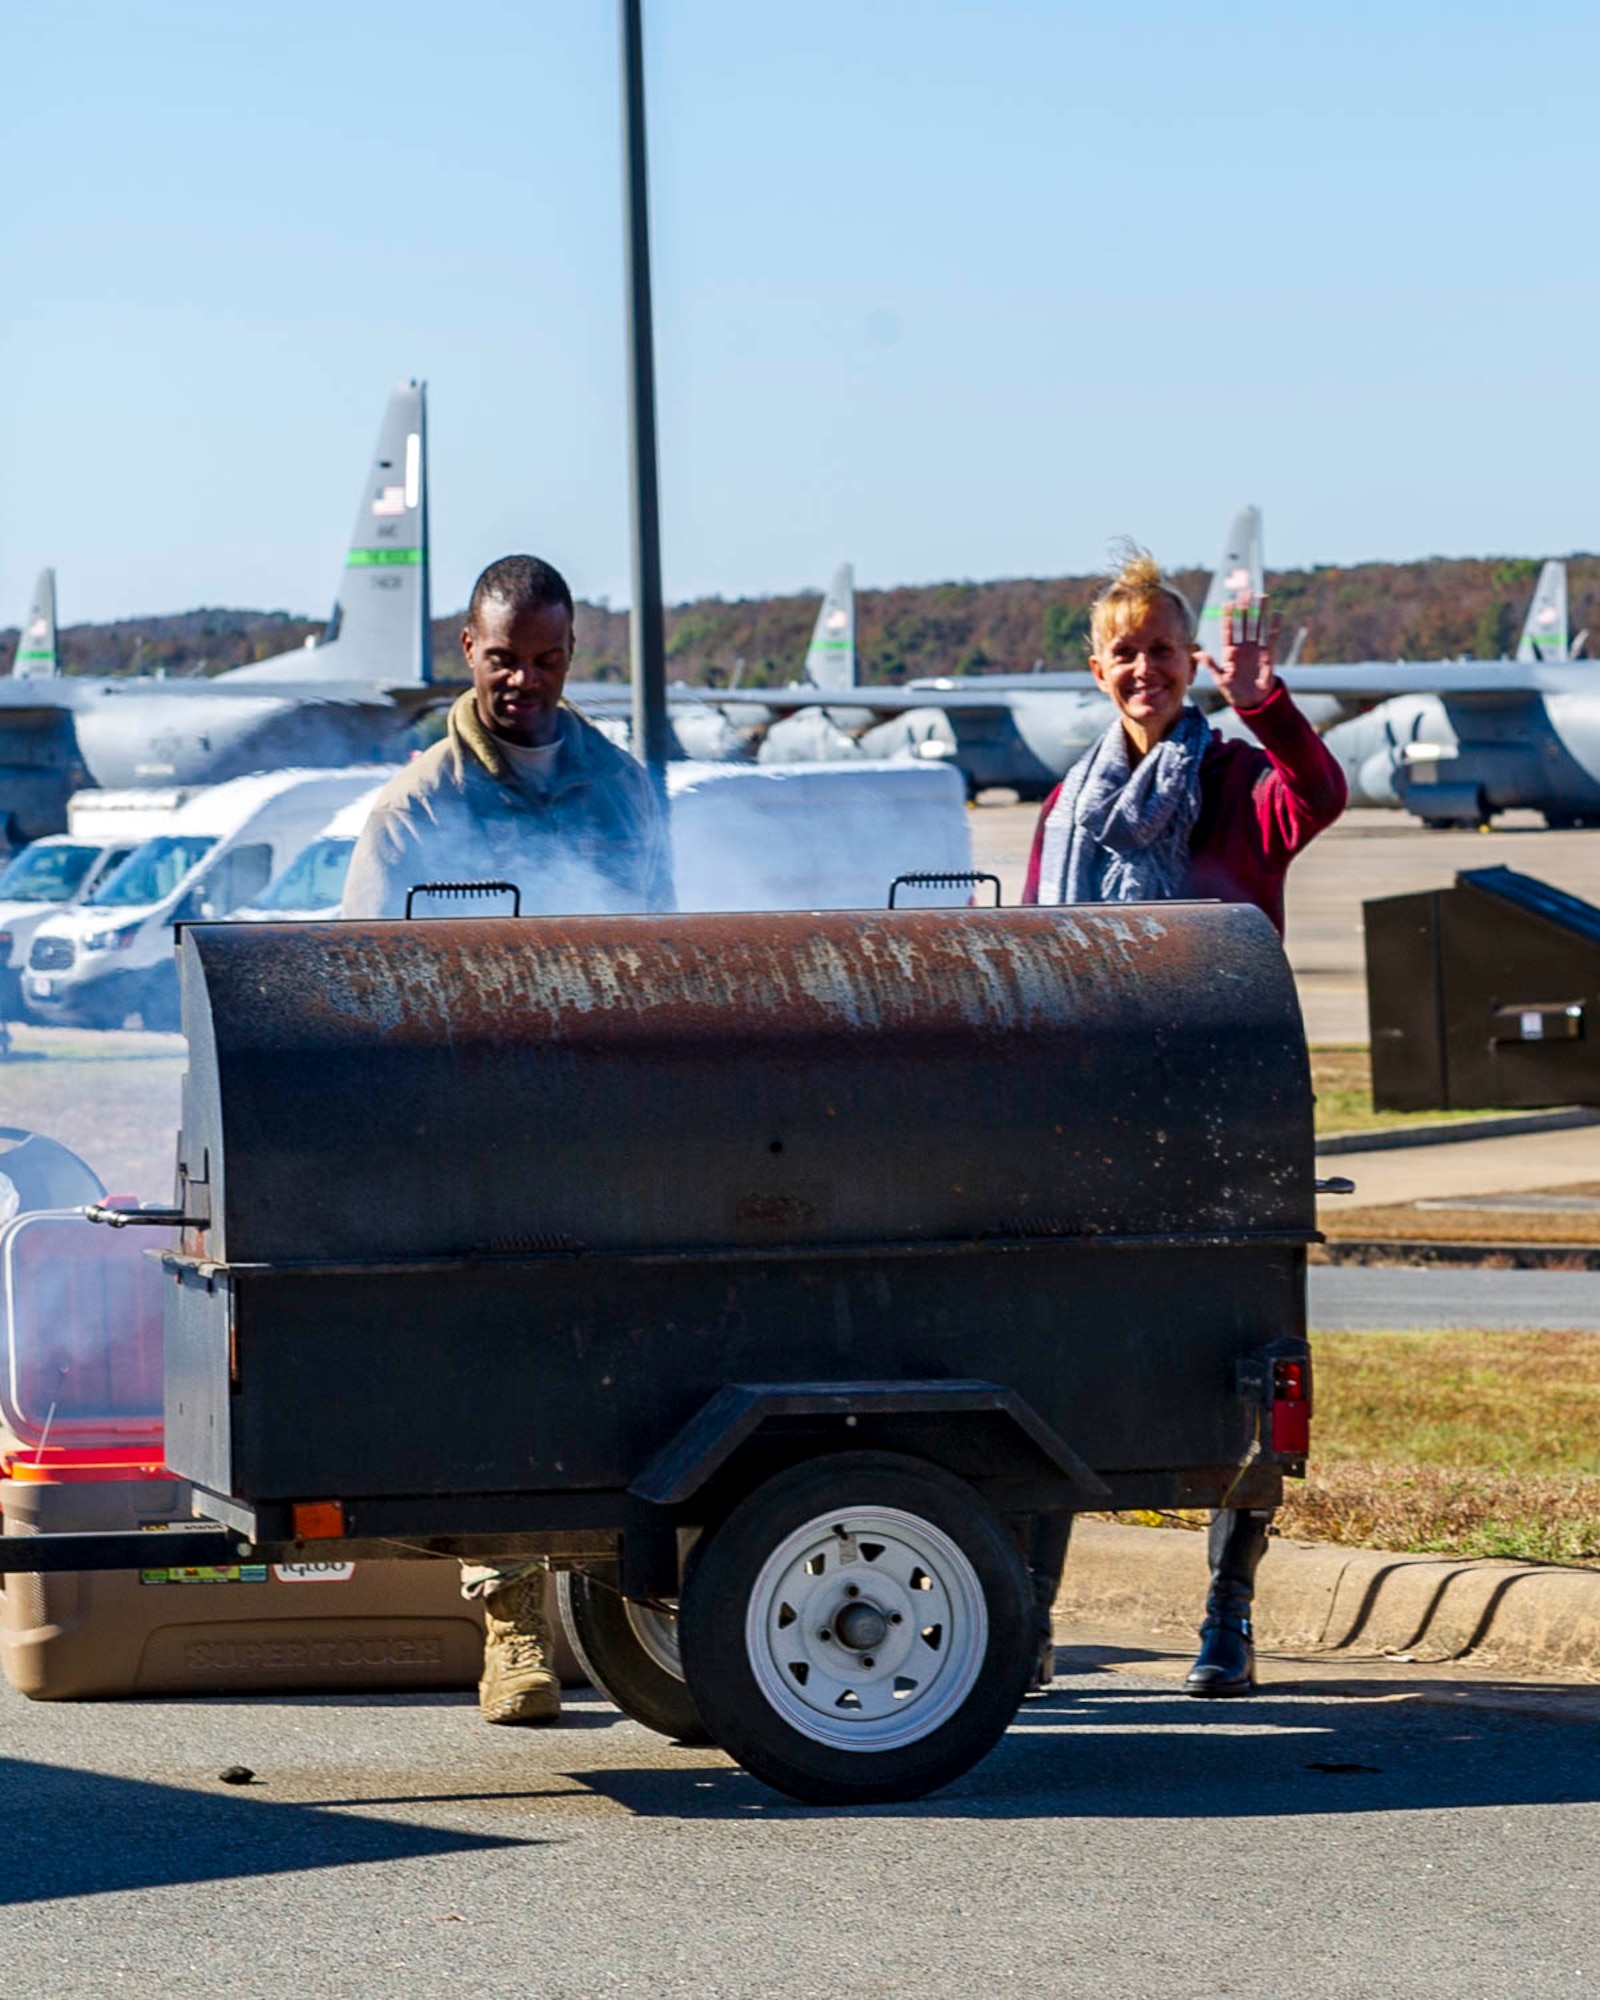 Tech. Sgt. Caleb Black (left), 913th Maintenance Squadron, and Chief Master Sgt. Kimberly Lord (right), 913th Airlift Group Superintendent, cook hamburgers and hot dogs on Nov. 2, 2019, at Little Rock Air Force Base, Ark. The 913th Airlift Group hosted the event, celebrating and showing appreciation for family members' support of their Airmen. (U.S. Air Force Reserve photo by Maj. Ashley Walker)